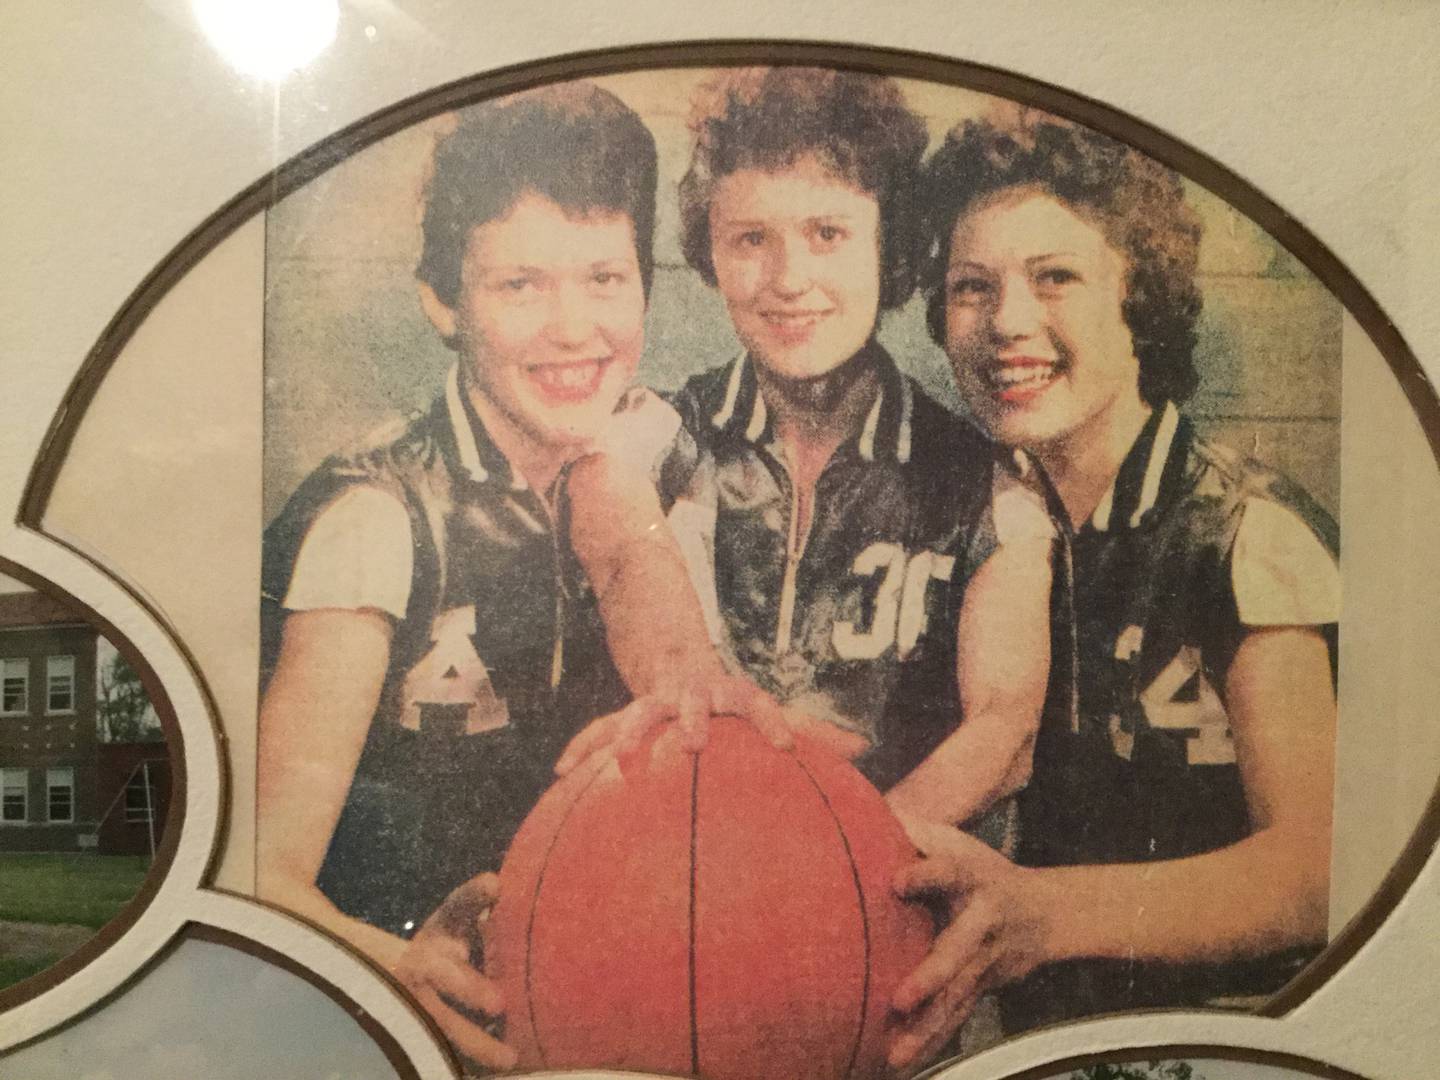 Three sisters - Betty Jo, Ellen and Barbara Mohr, were featured in the local paper as they all played basketball at East Union in the late 1950s and early 1960s.